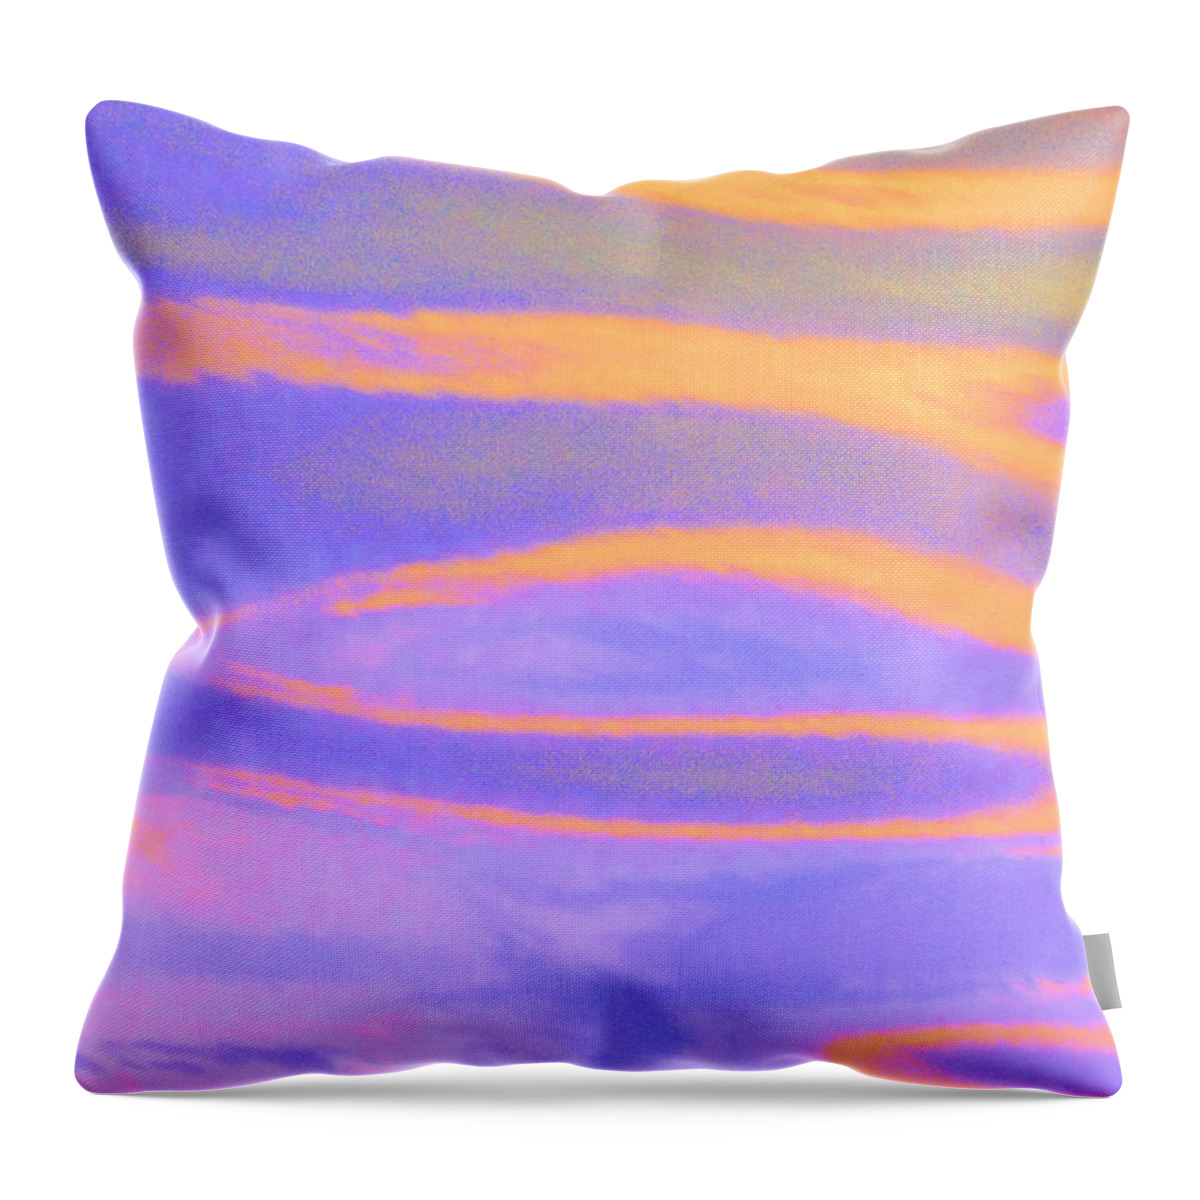 Abstract Throw Pillow featuring the photograph Threads Of Light by Sybil Staples